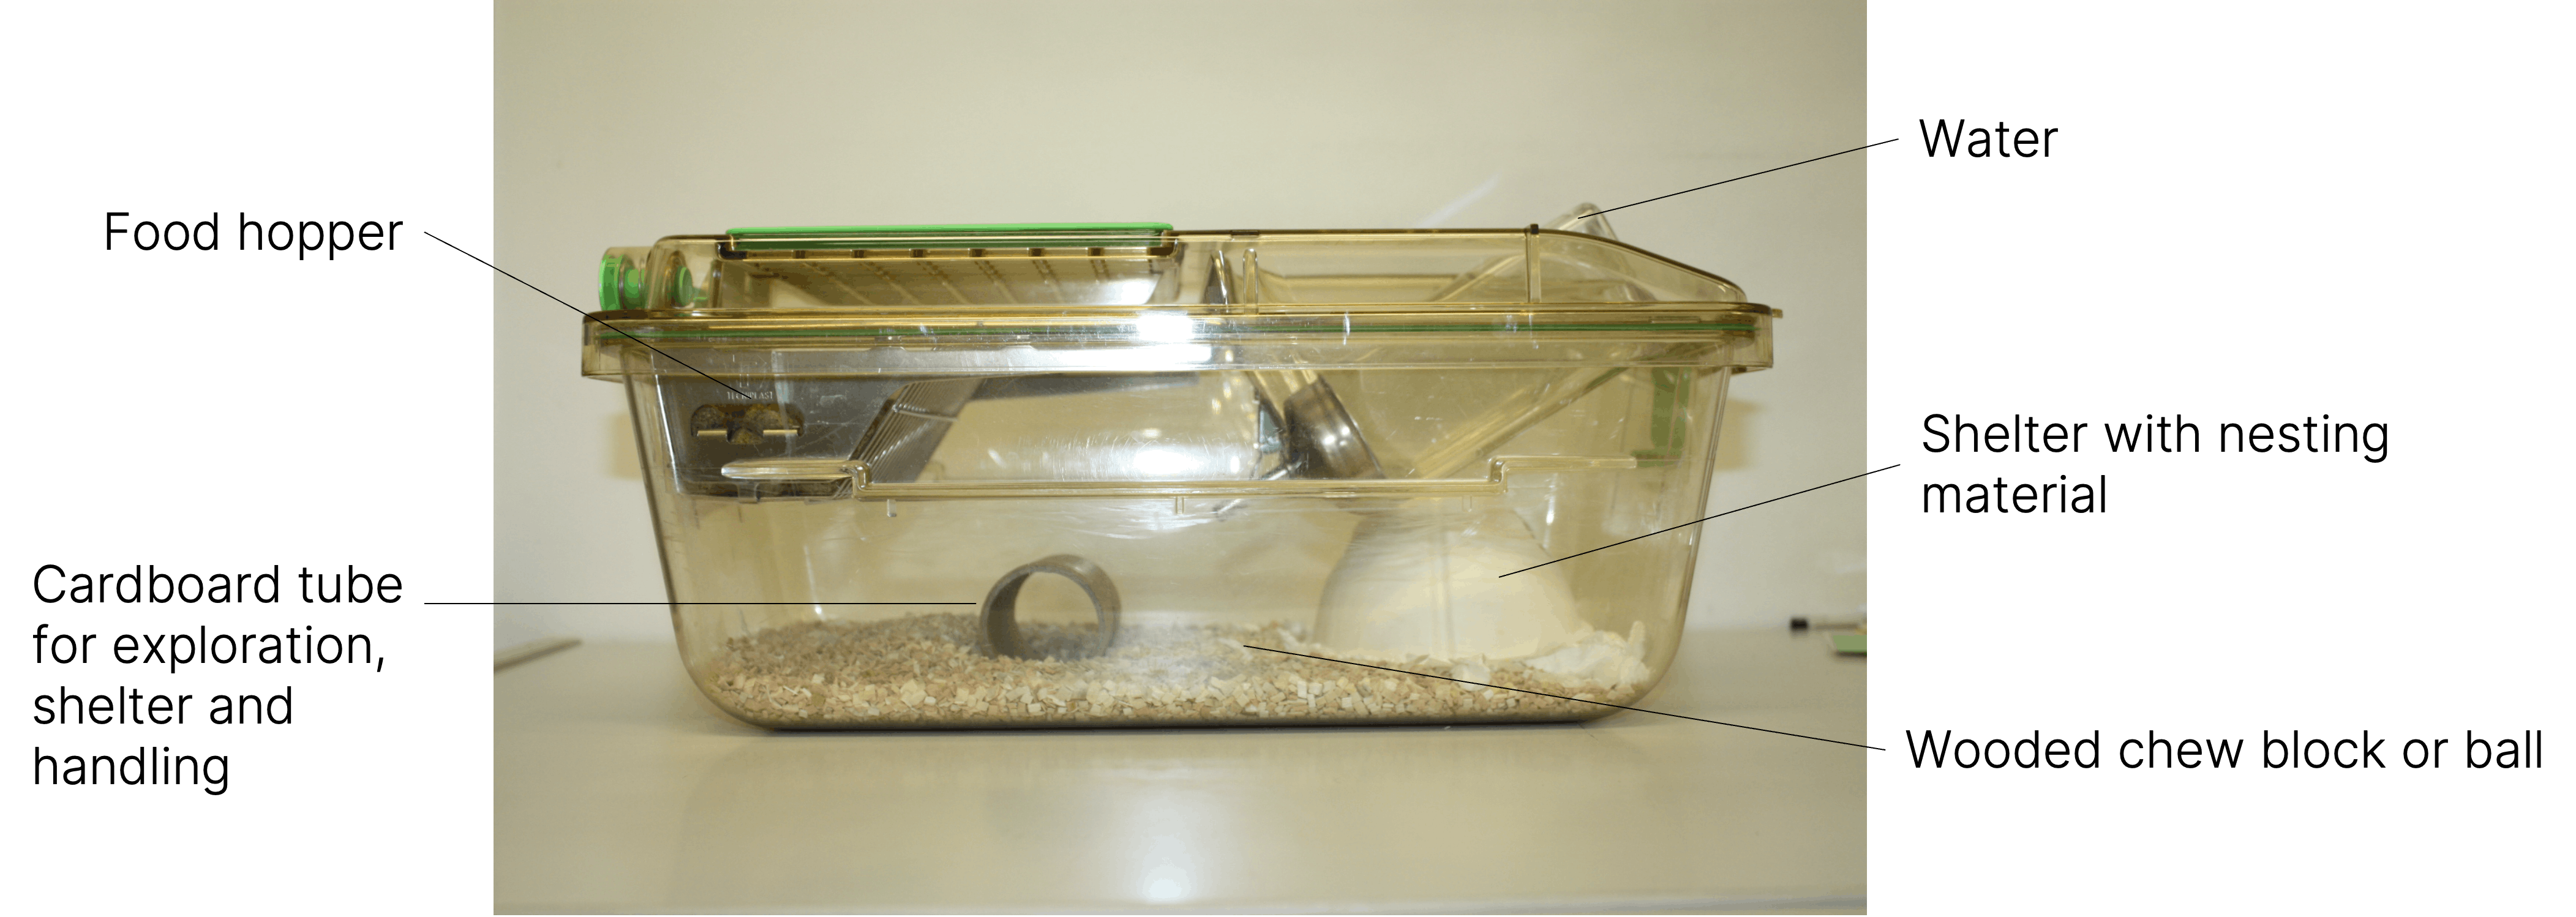 An example of an enriched IVC cage for mice.